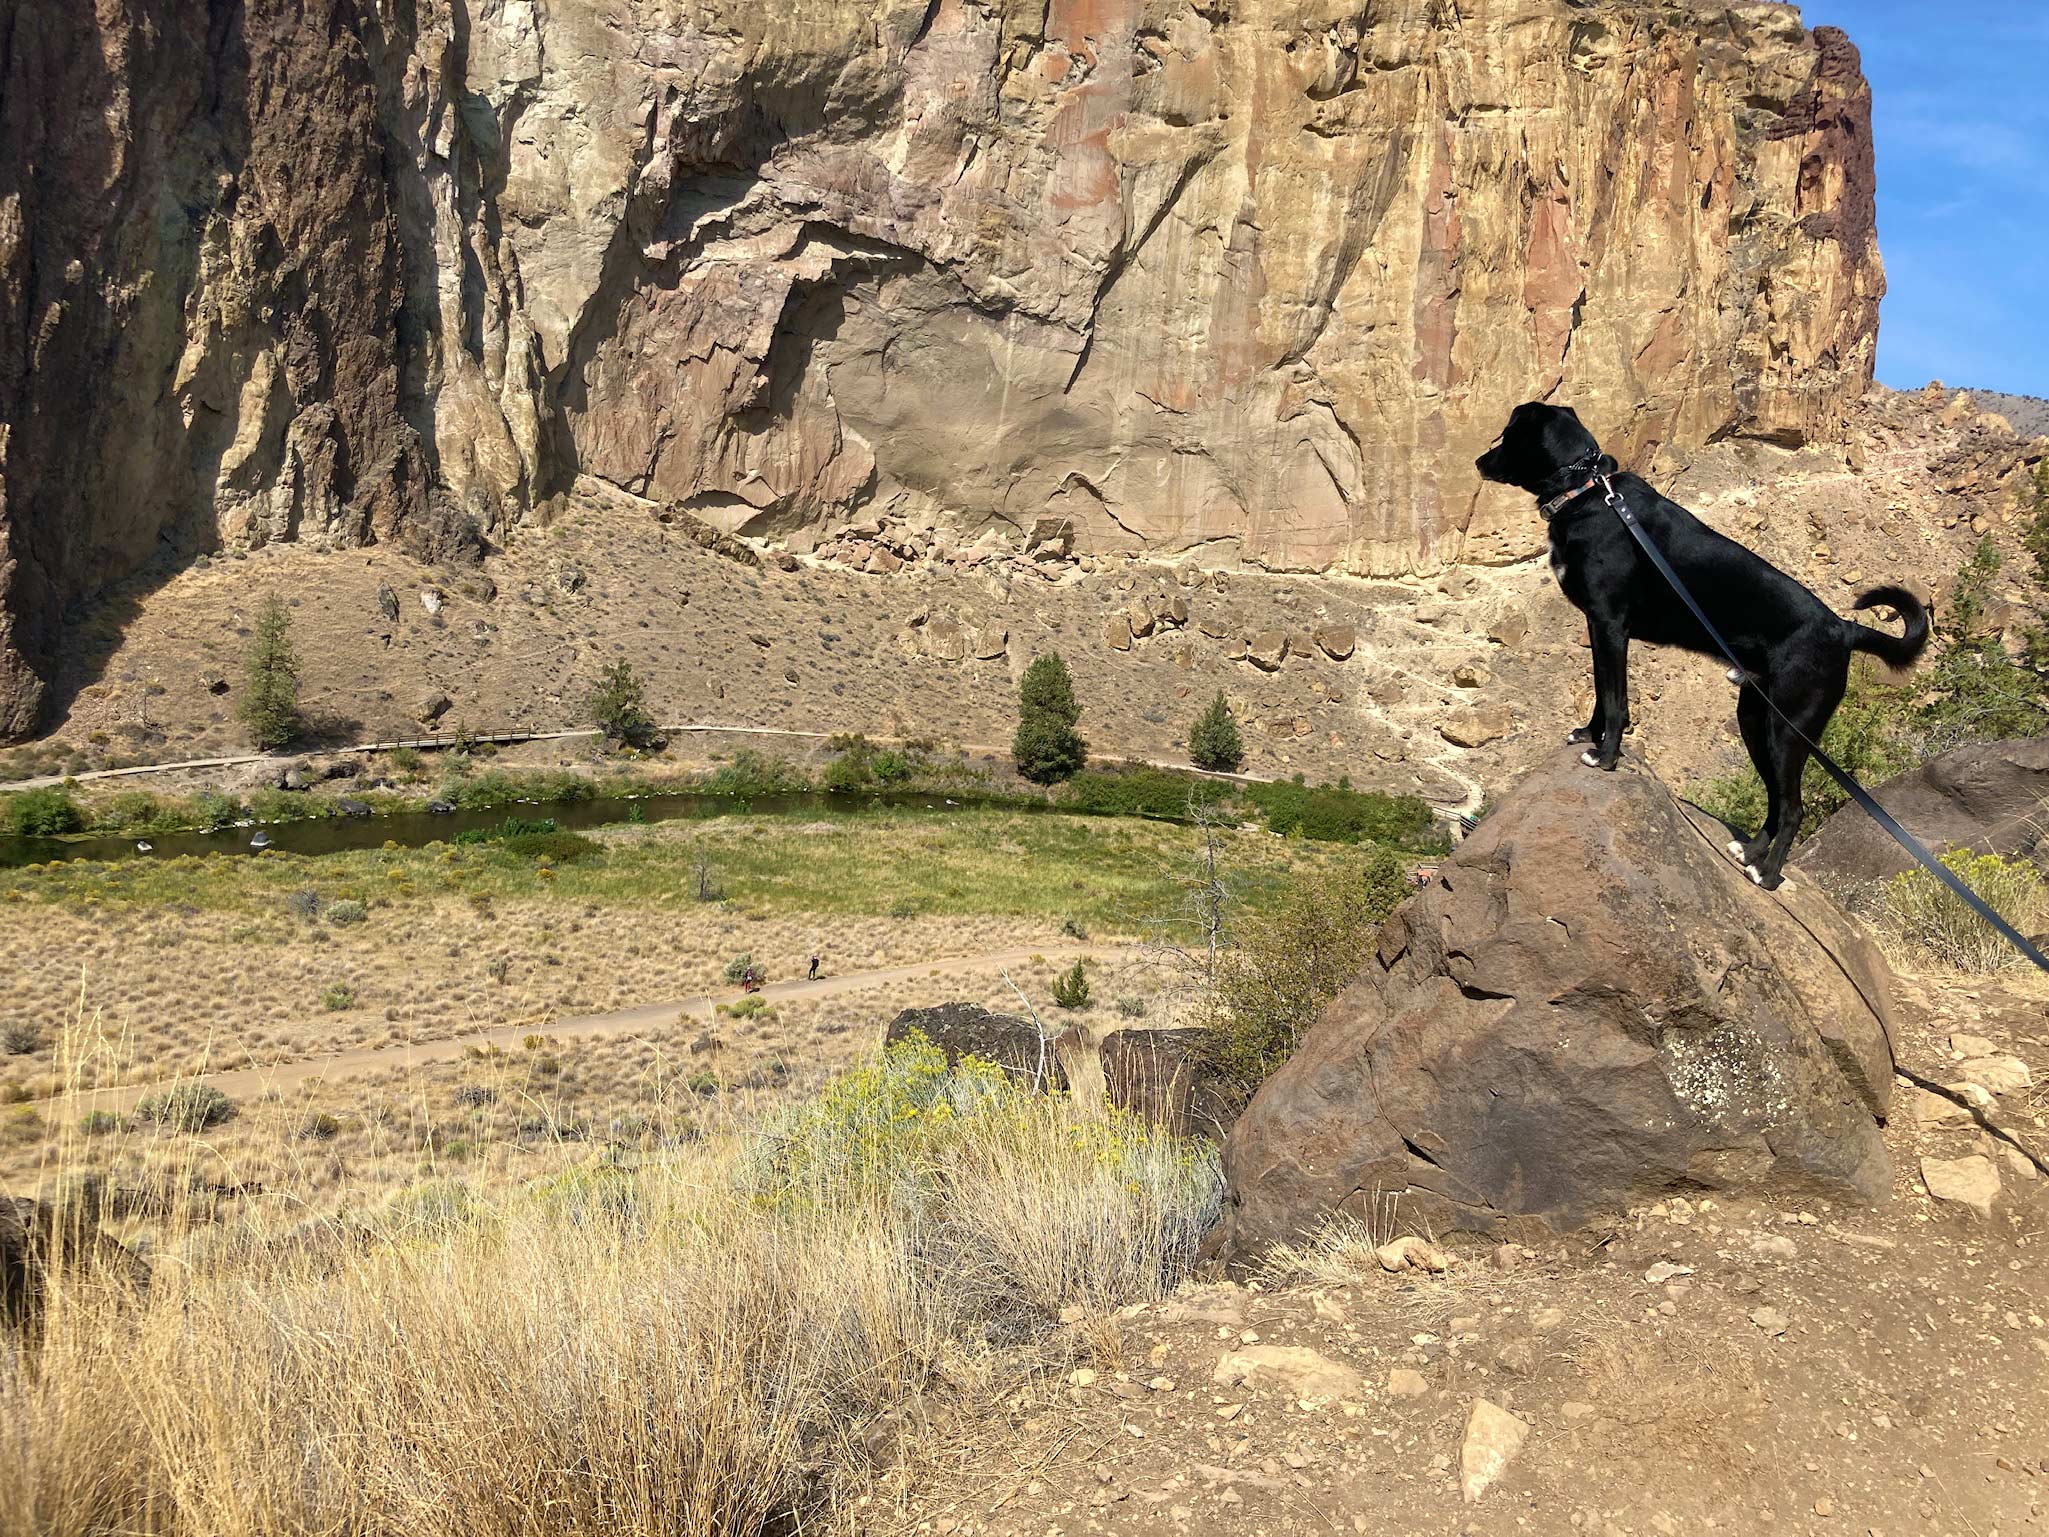 A black dog perched on a rock with a rock slab in the background